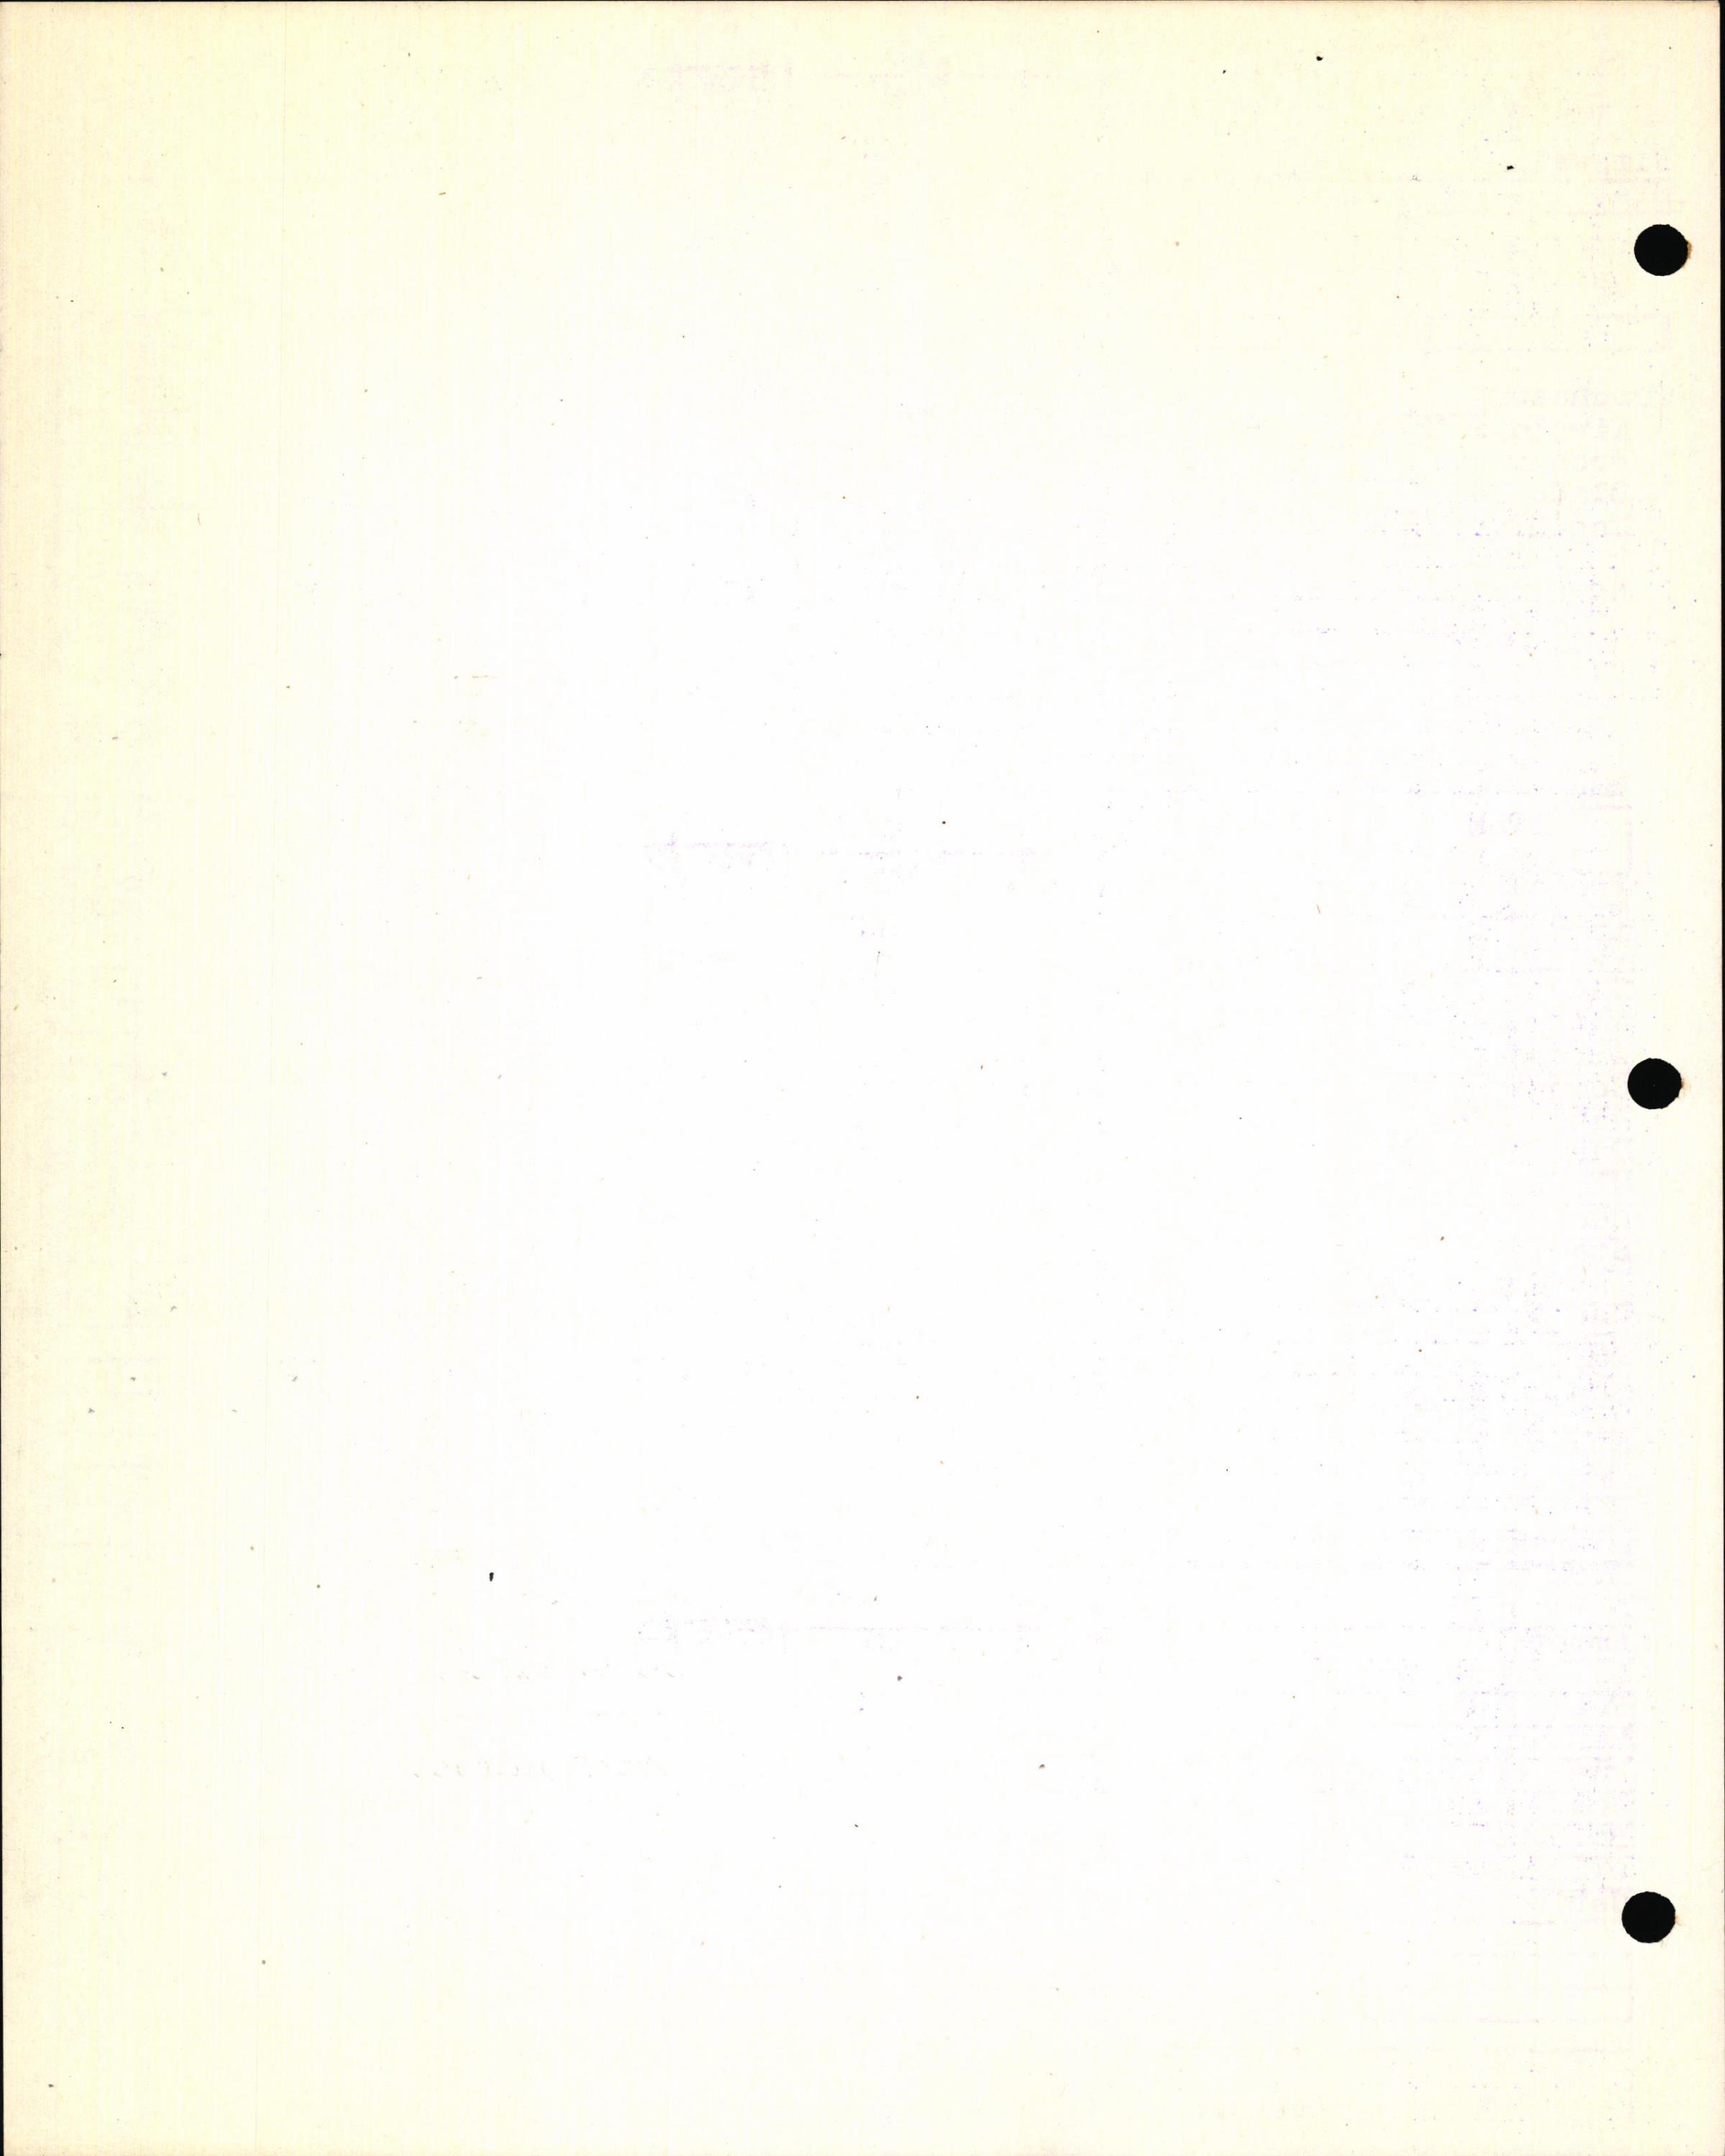 Sample page 6 from AirCorps Library document: Technical Information for Serial Number 1396